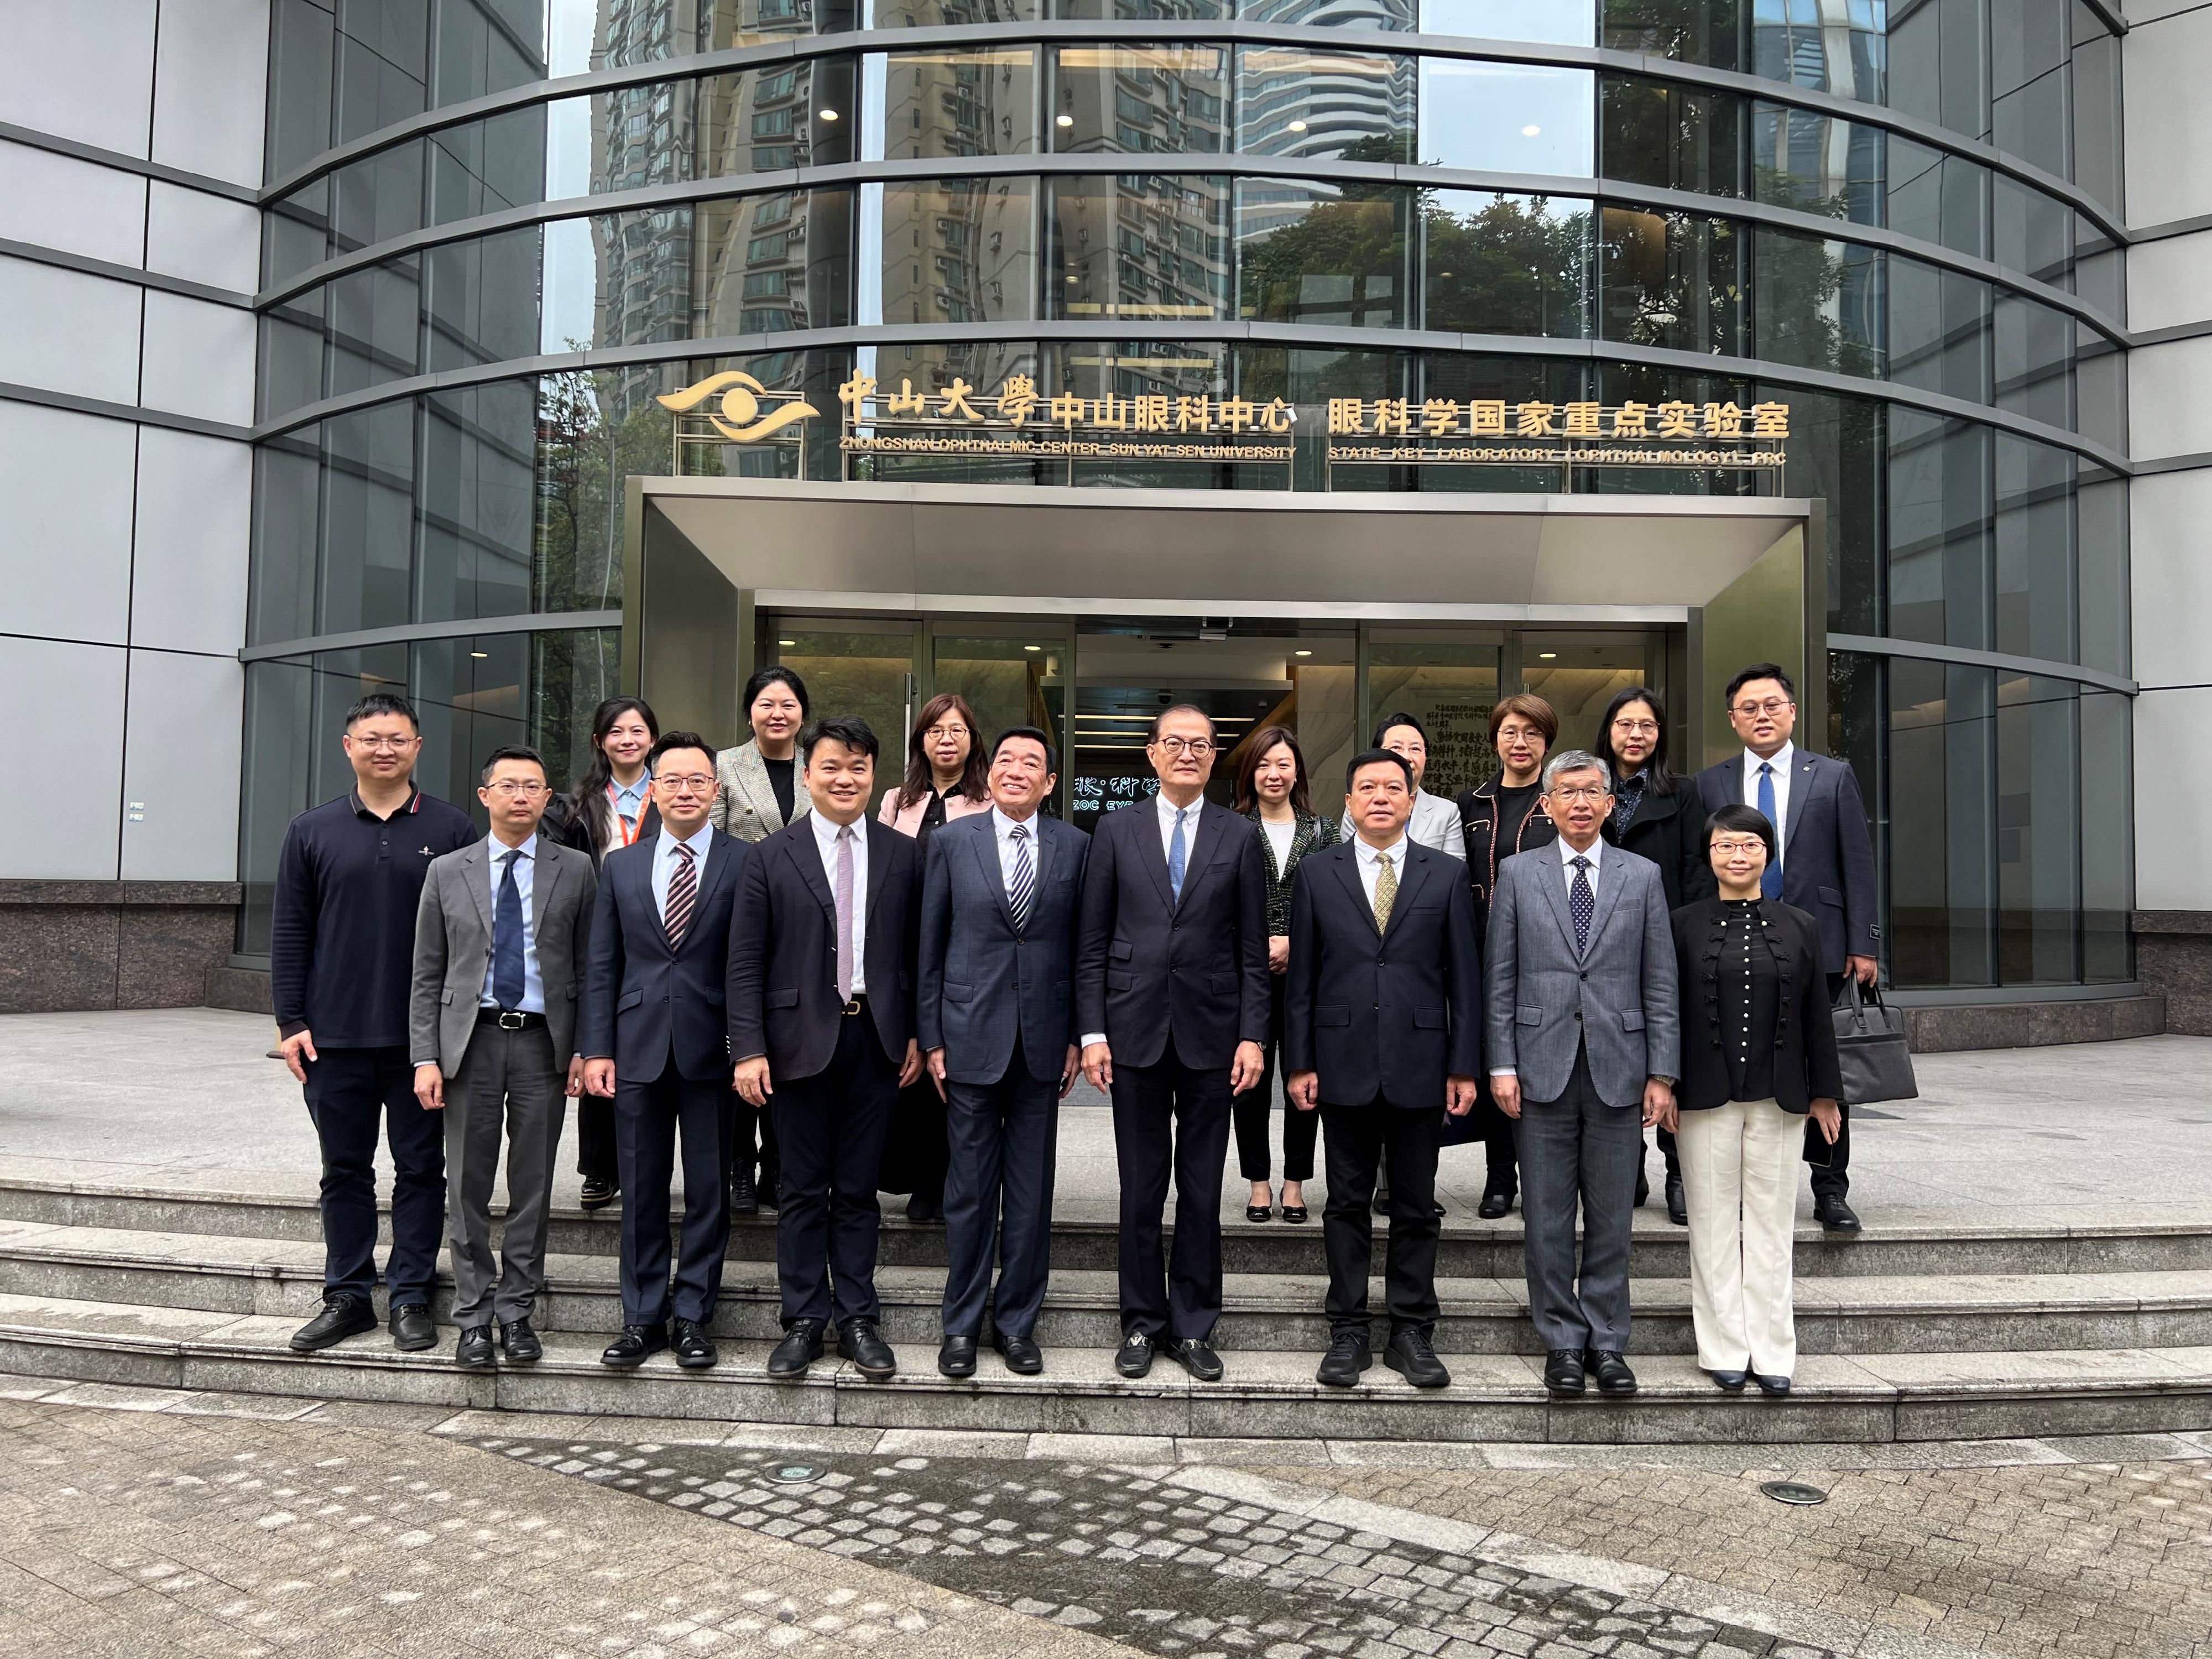 ​The Secretary for Health, Professor Lo Chung-mau, and his delegation visited the Zhongshan Ophthalmic Center of Sun Yat-sen University in Guangzhou today (March 13). Photo shows Professor Lo (front row, fourth right); Deputy Secretary for Health Mr Eddie Lee (front row, third left); the Senior Advisor (Secretary for Health's Office), Dr Joe Fan (front row, second left); the Chairman of the Hospital Authority (HA), Mr Henry Fan (front row, fifth left); the Deputising Chief Executive of the HA, Dr Simon Tang (front row, second right), and other attendees.